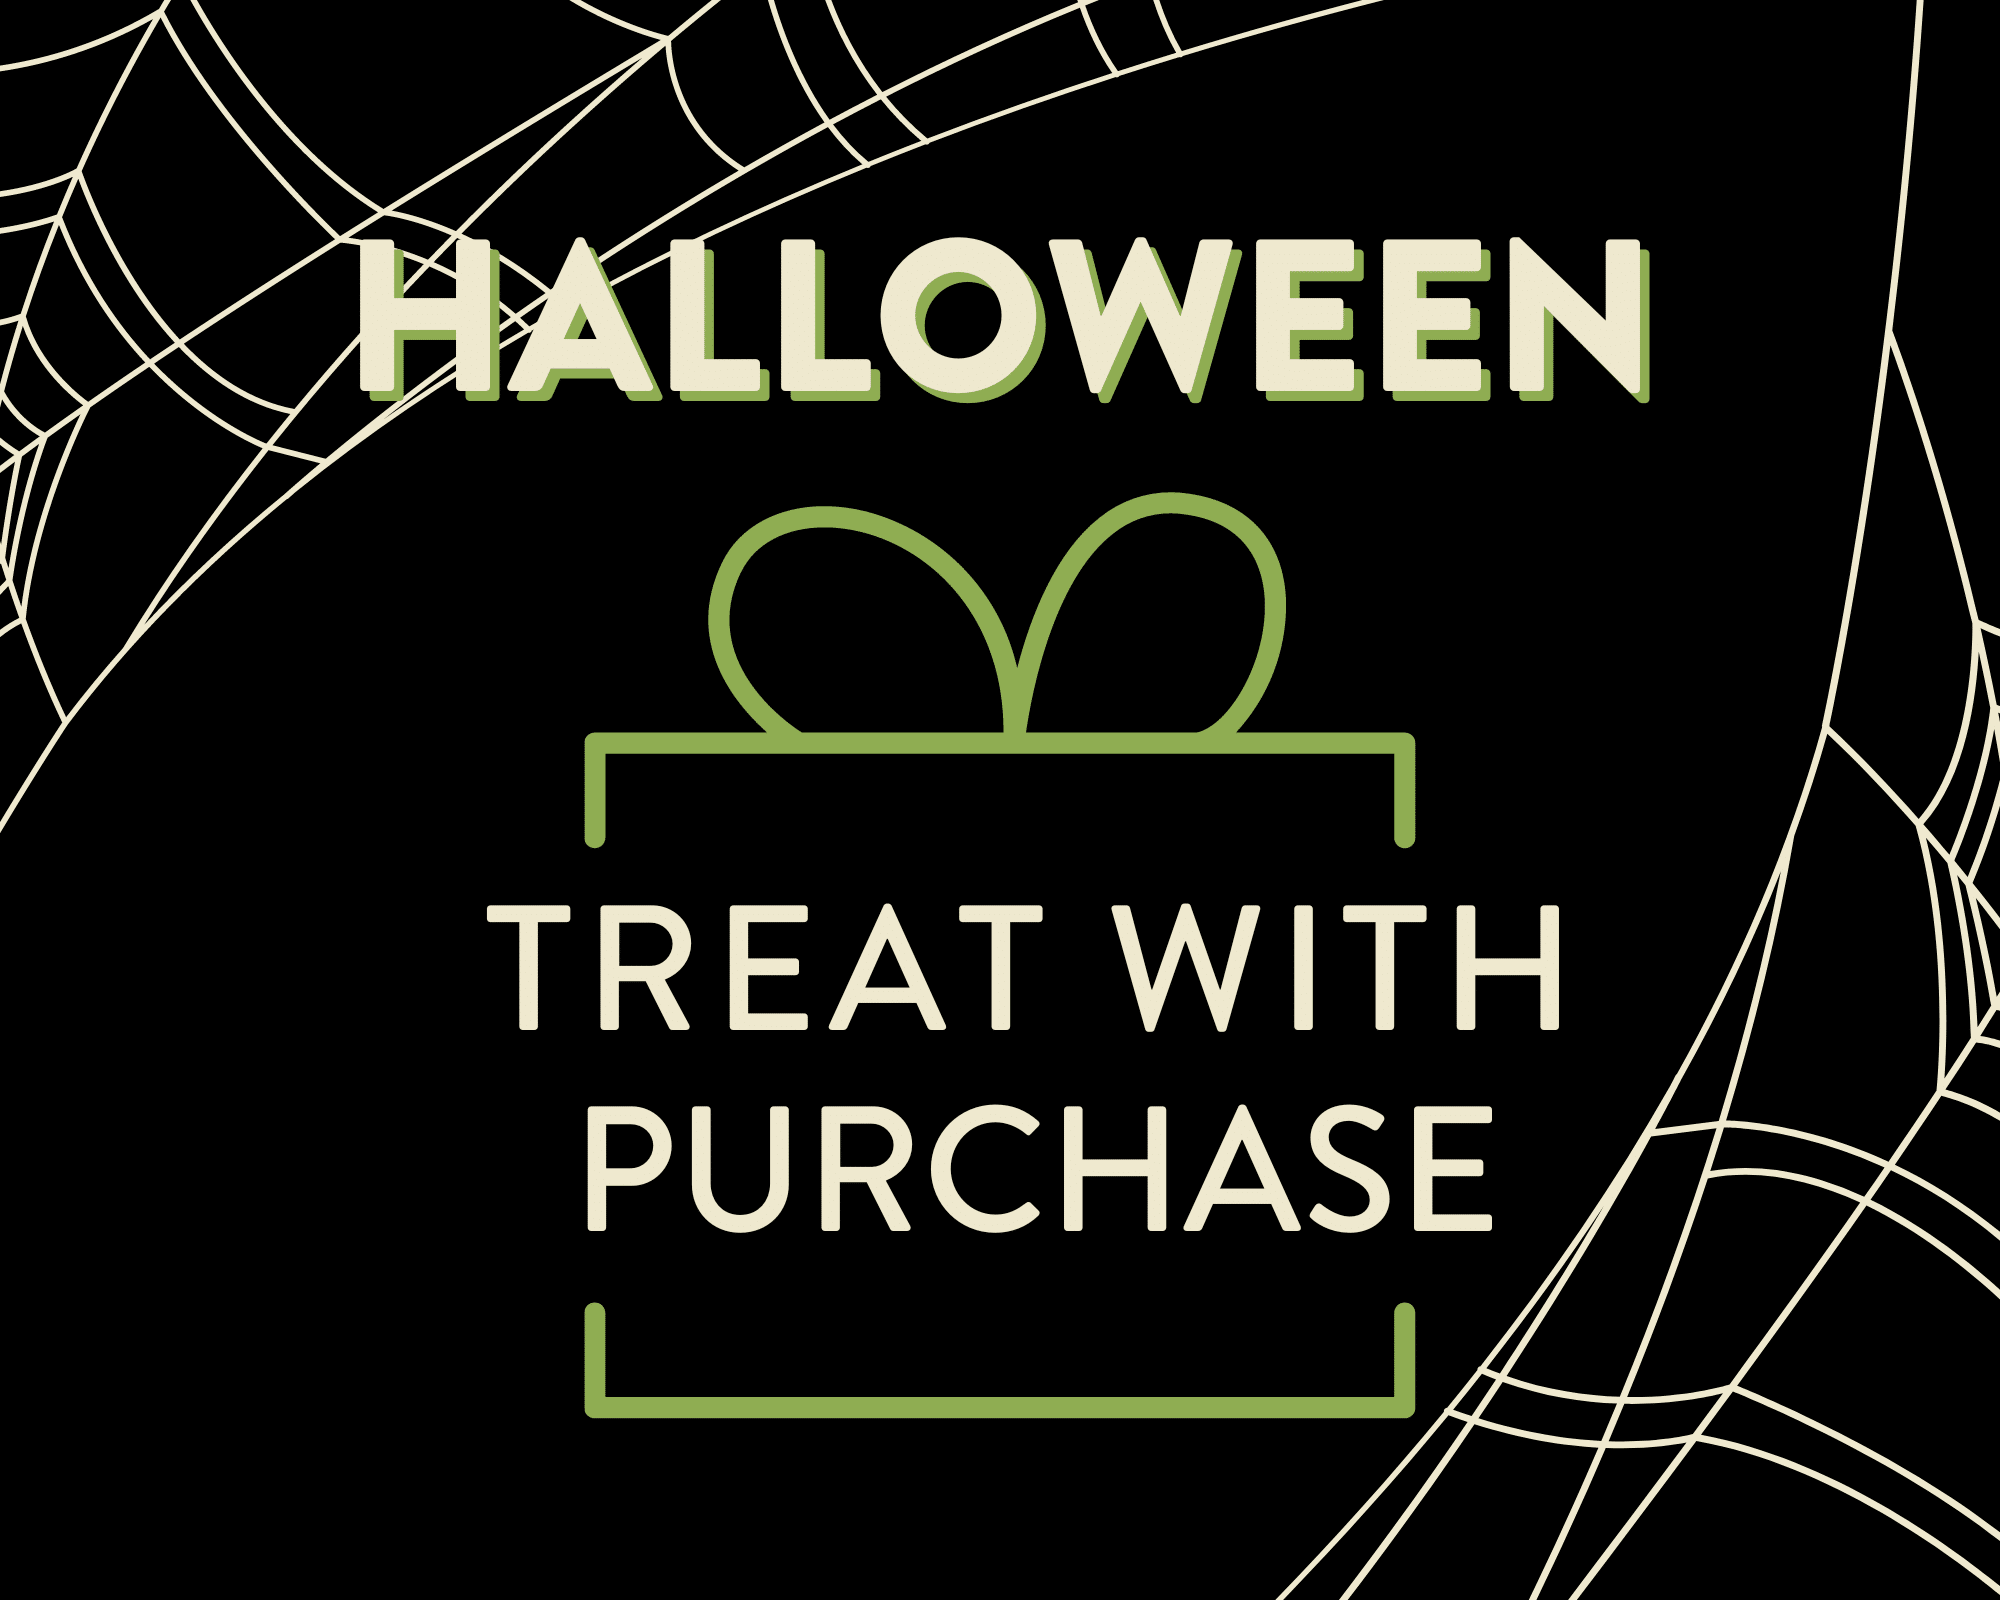 Halloween Treats with Purchase